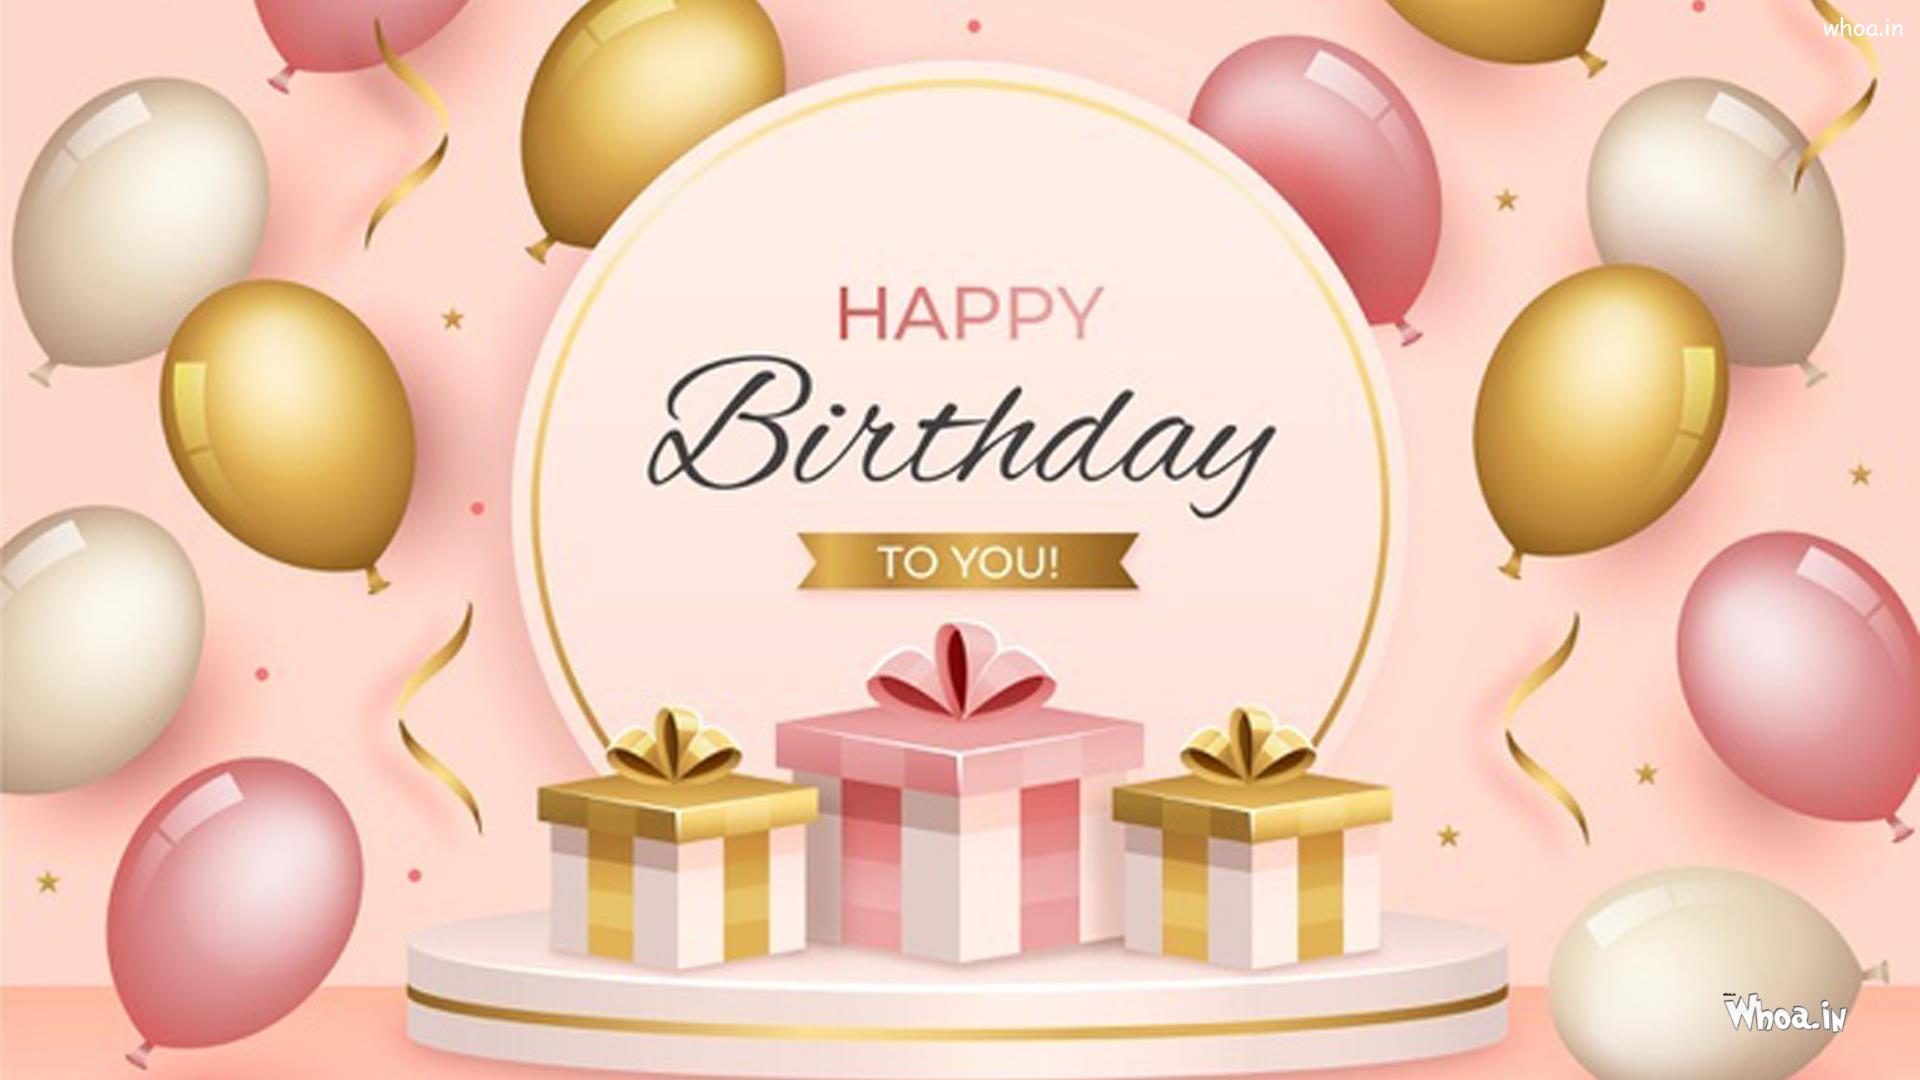 Best Happy Birthday Images -Wishes With Beautiful Images